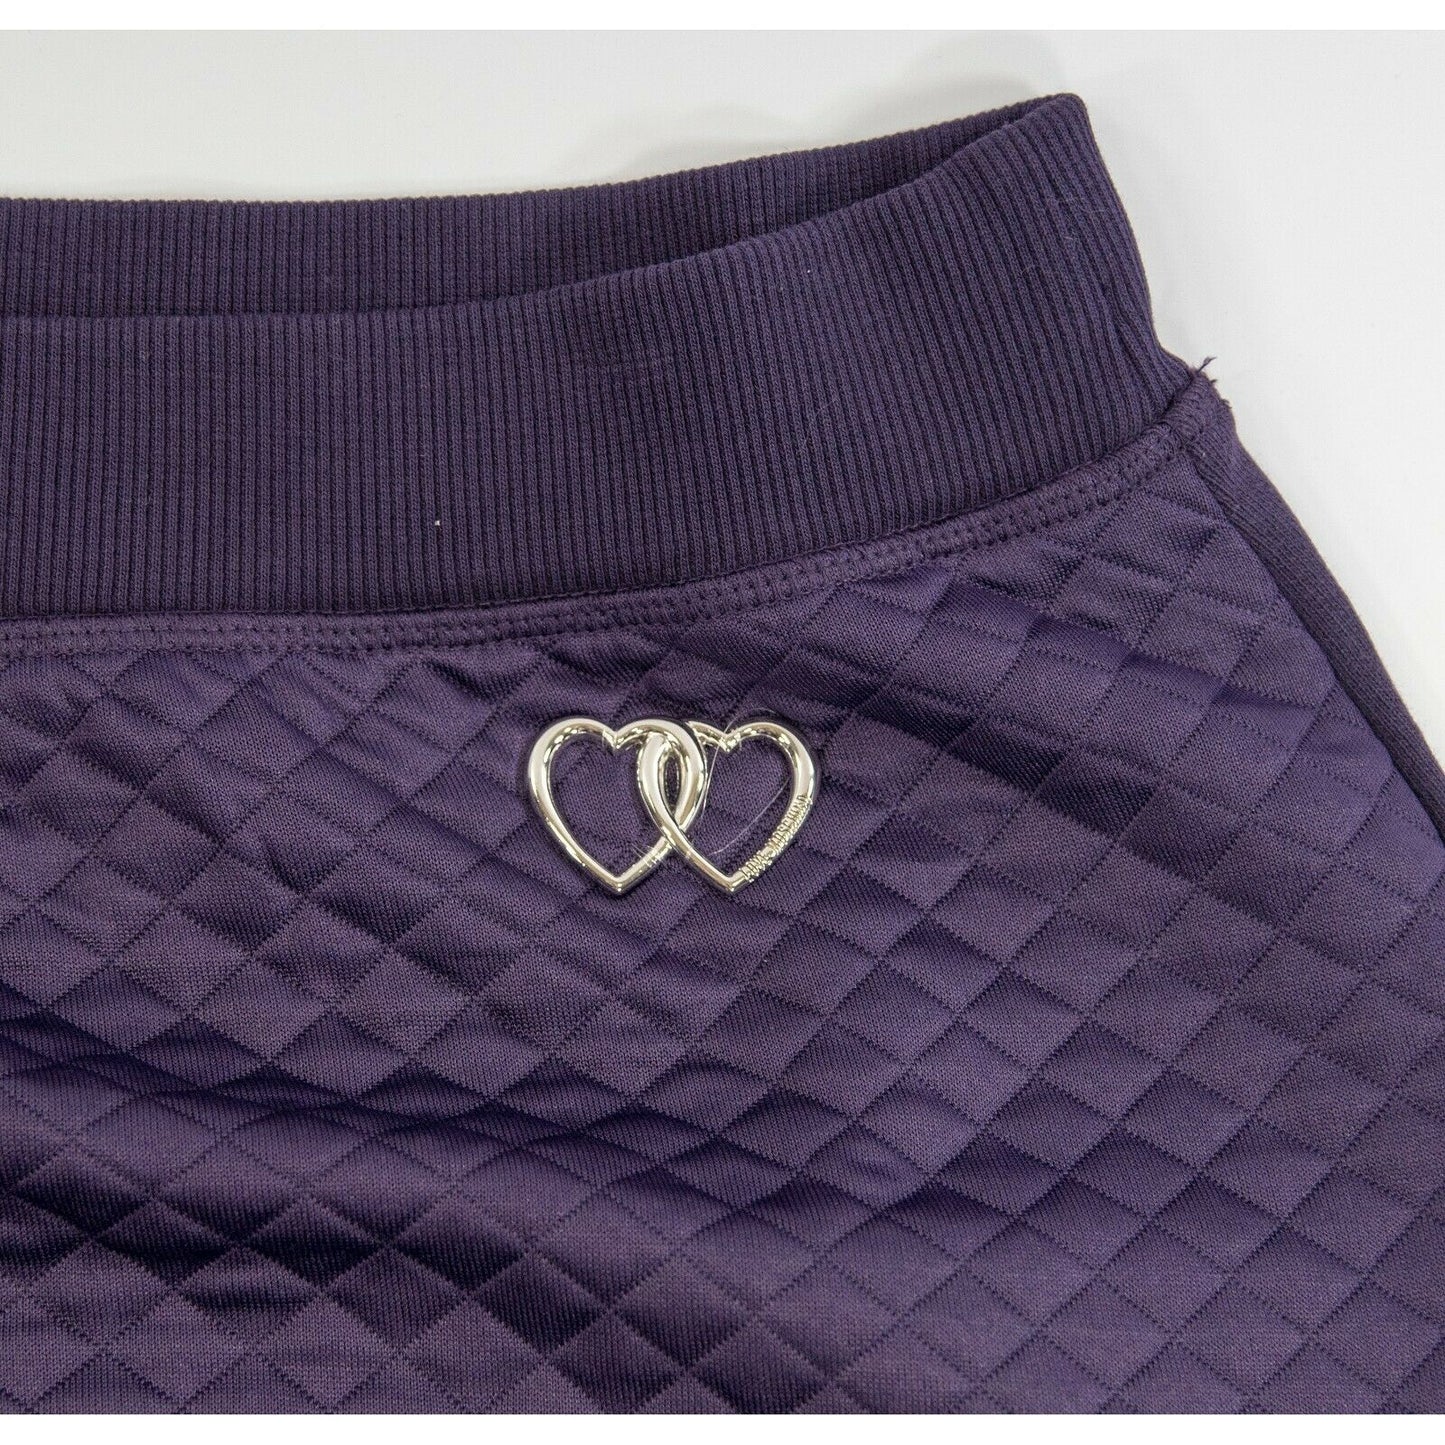 Moschino Love Violet Purple Quilted Satin Pencil Stretch Skirt 48 14 NWT $595